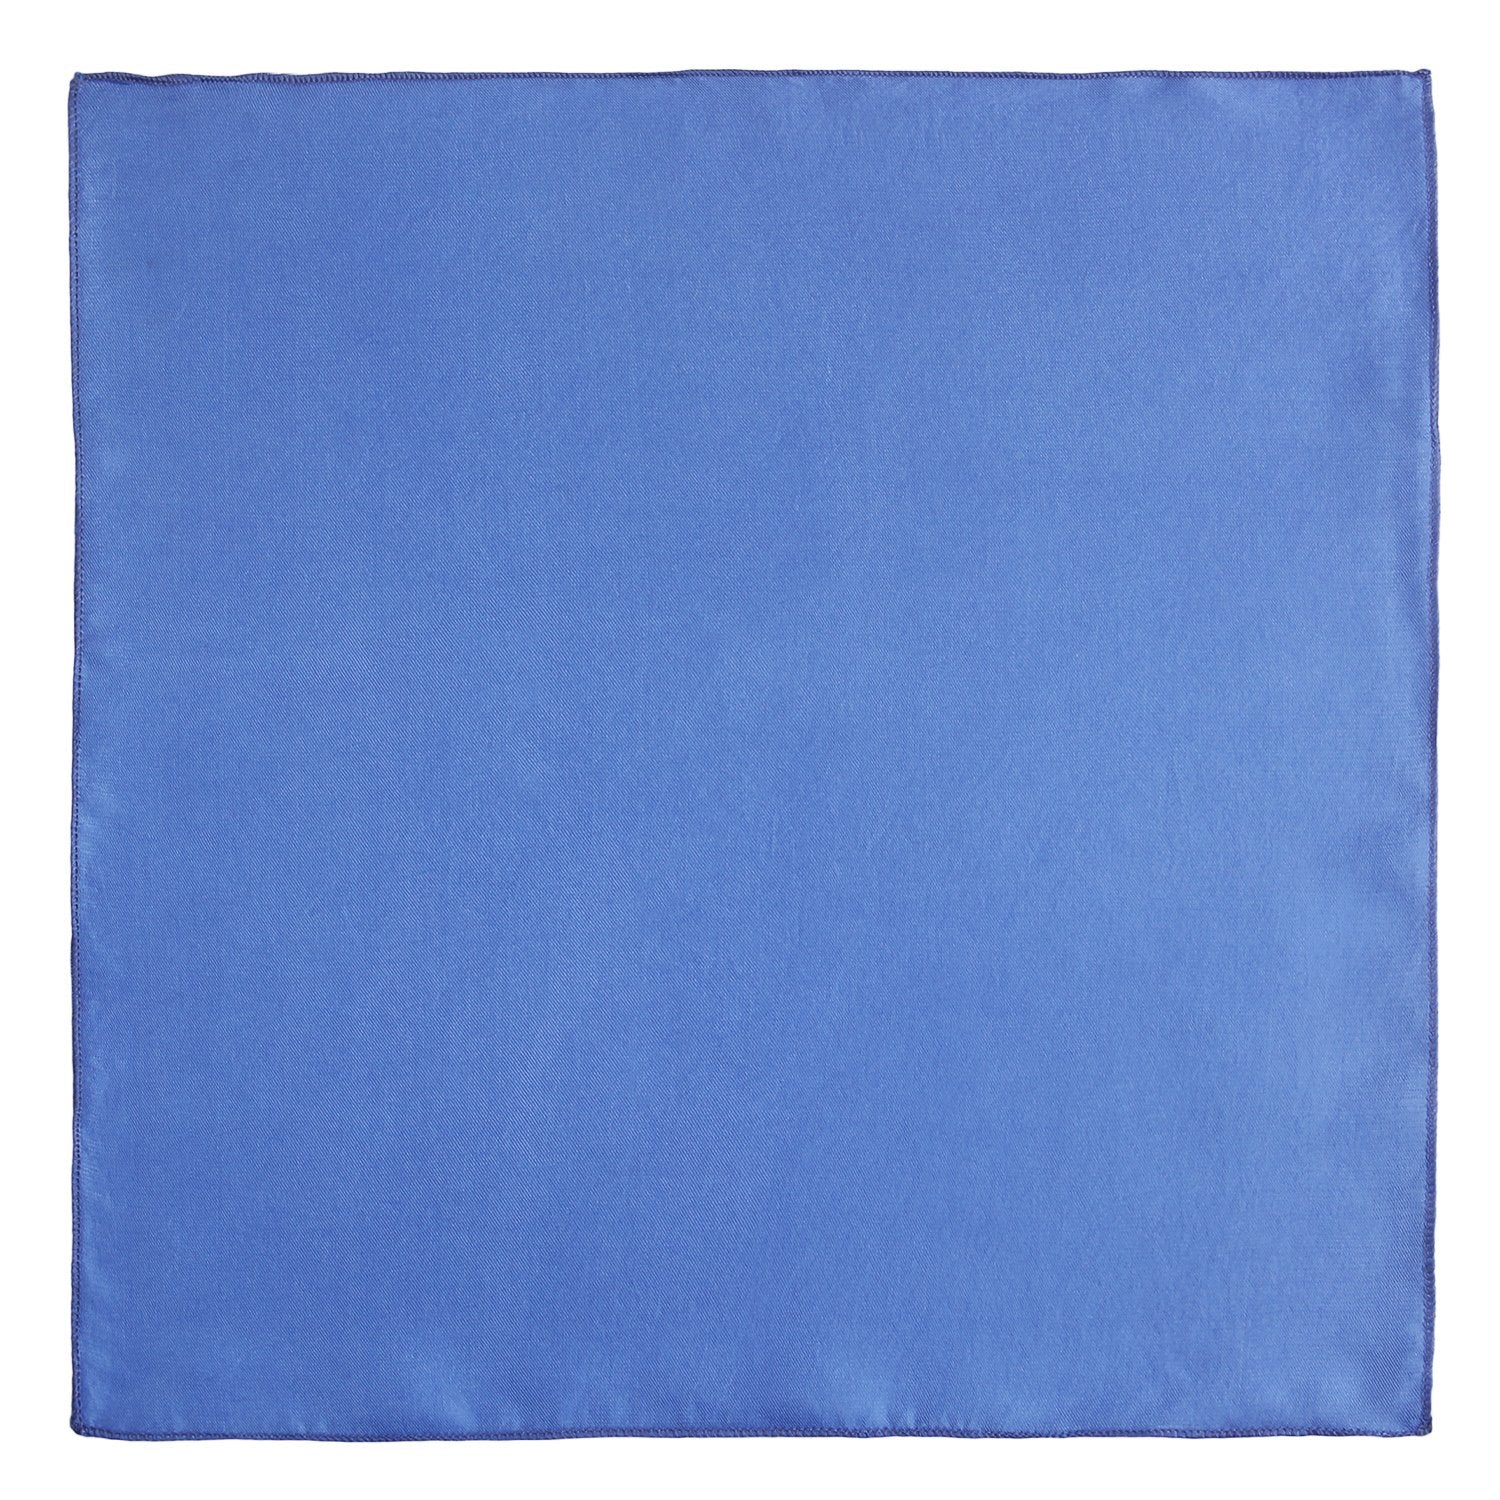 Chokore Marina Pure Silk Pocket Square, from the Solids Line